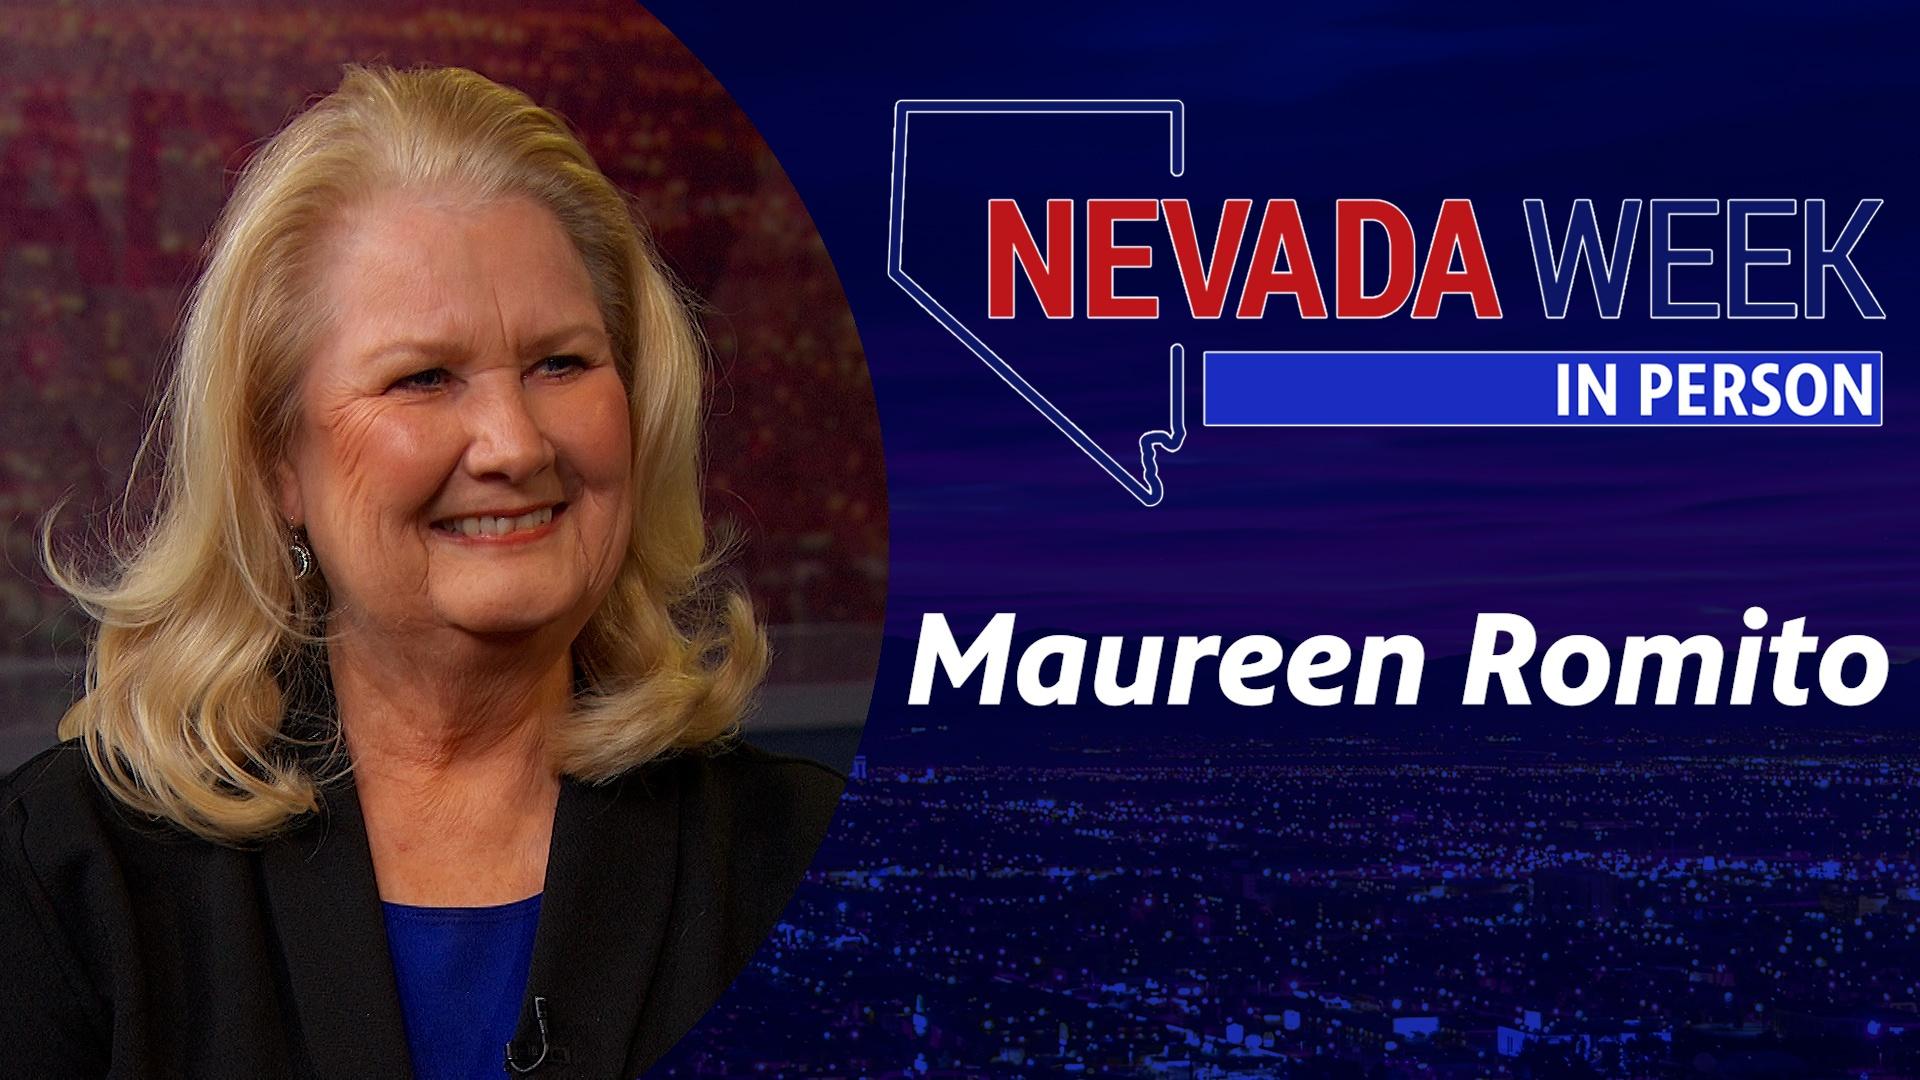 Nevada Week In Person | Maureen Romito